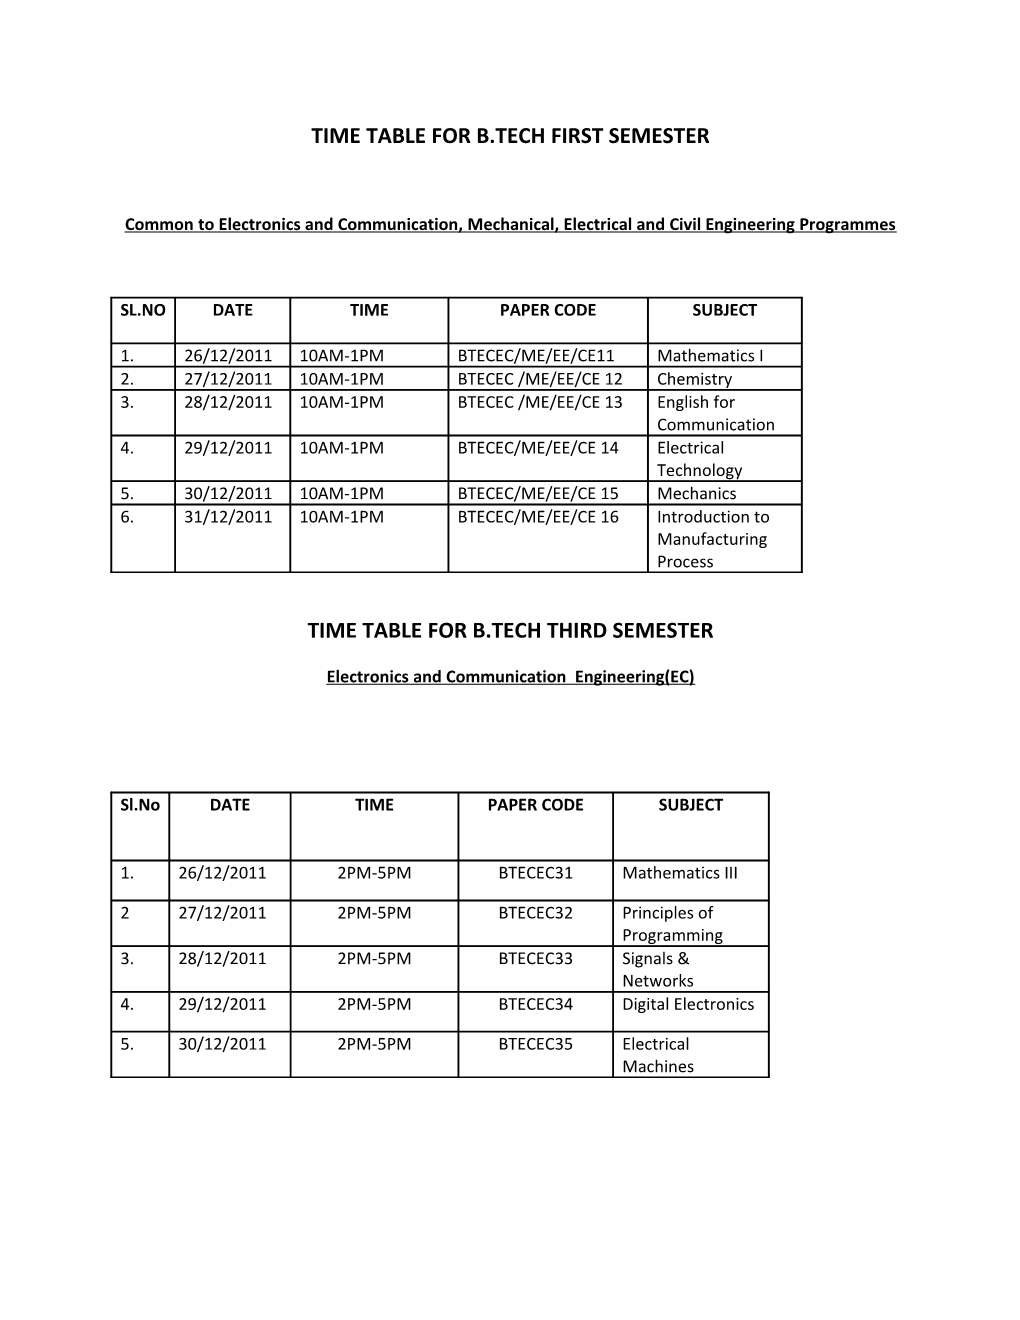 Time Table for B.Tech First Semester